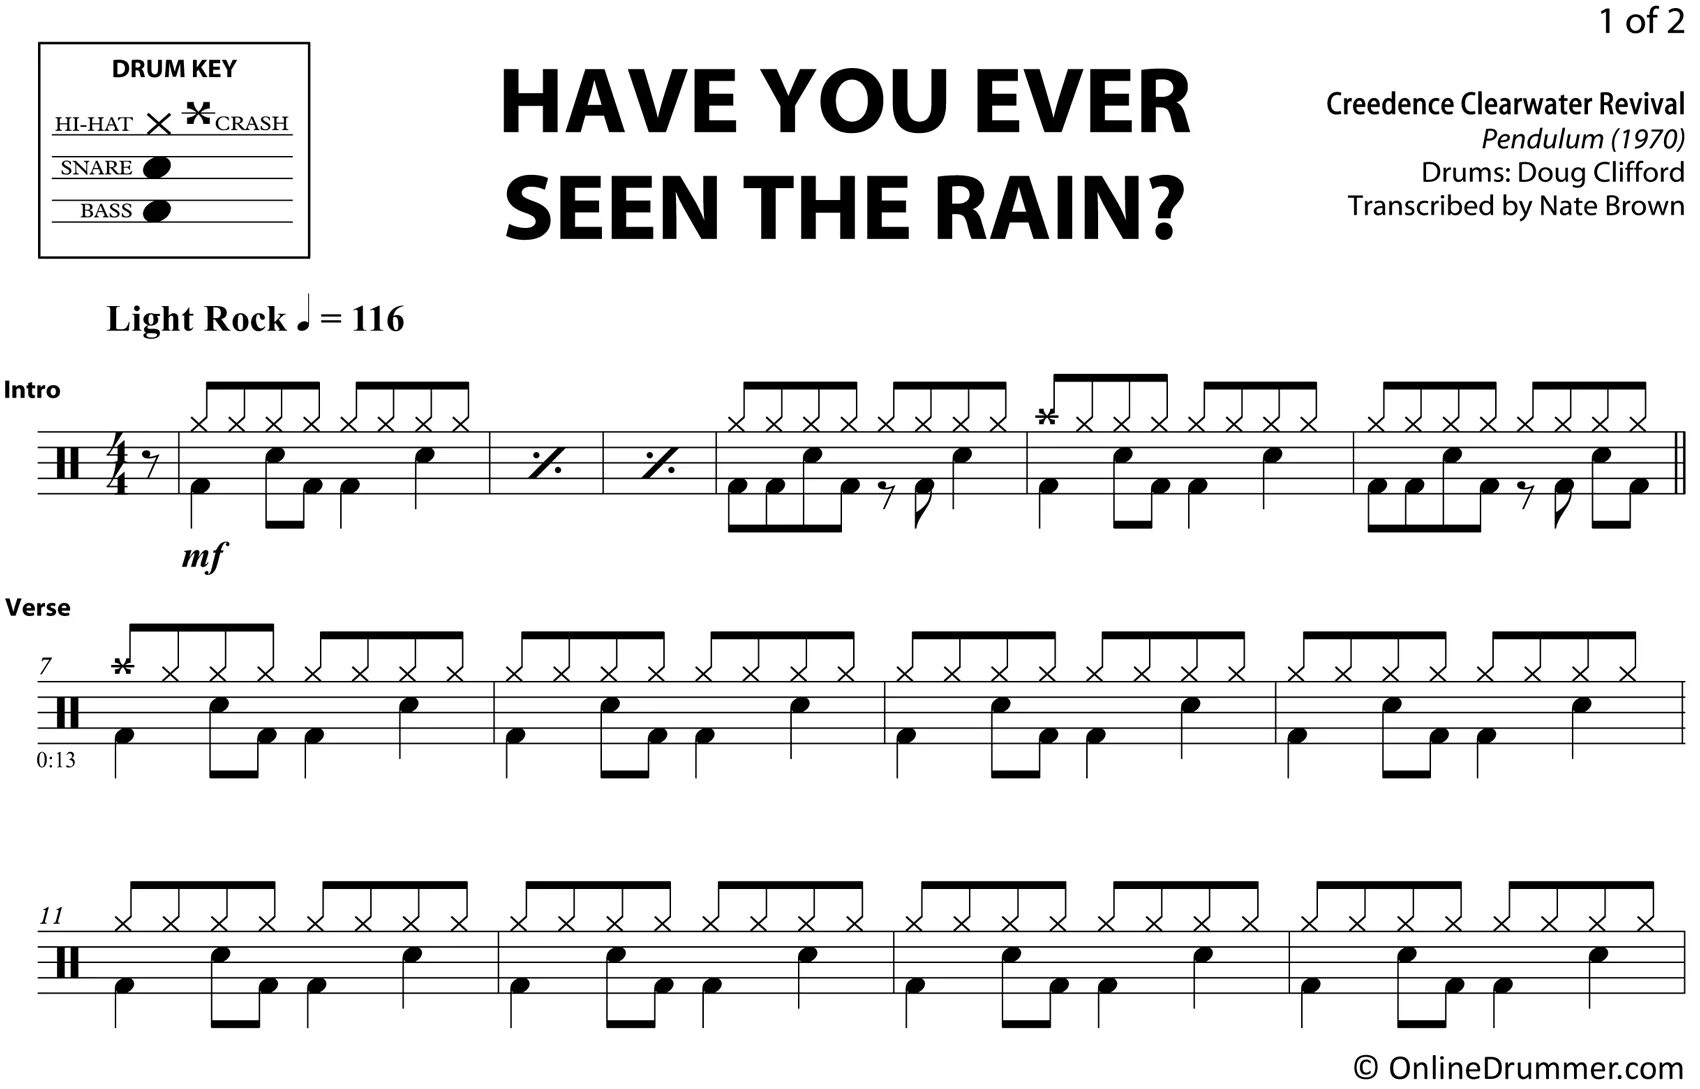 Have you ever seen the Rain? От Creedence Clearwater Revival. Creedence Clearwater Revival - have you ever seen the Rain (1970). Have you ever seen the Rain Криденс. Have you ever seen the Rain Ноты. Creedence clearwater revival rain